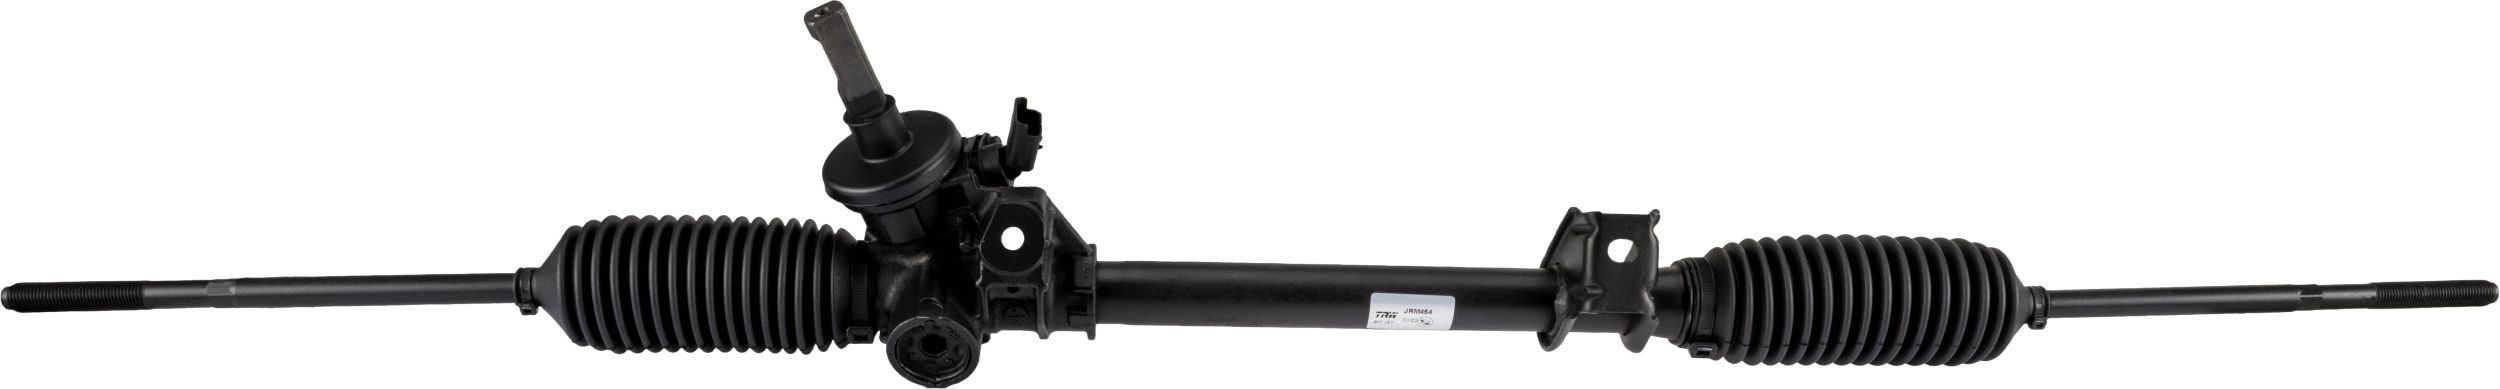 JRM454 TRW Power steering rack LAND ROVER Mechanical, for left-hand drive vehicles, untoothed, 1110 mm